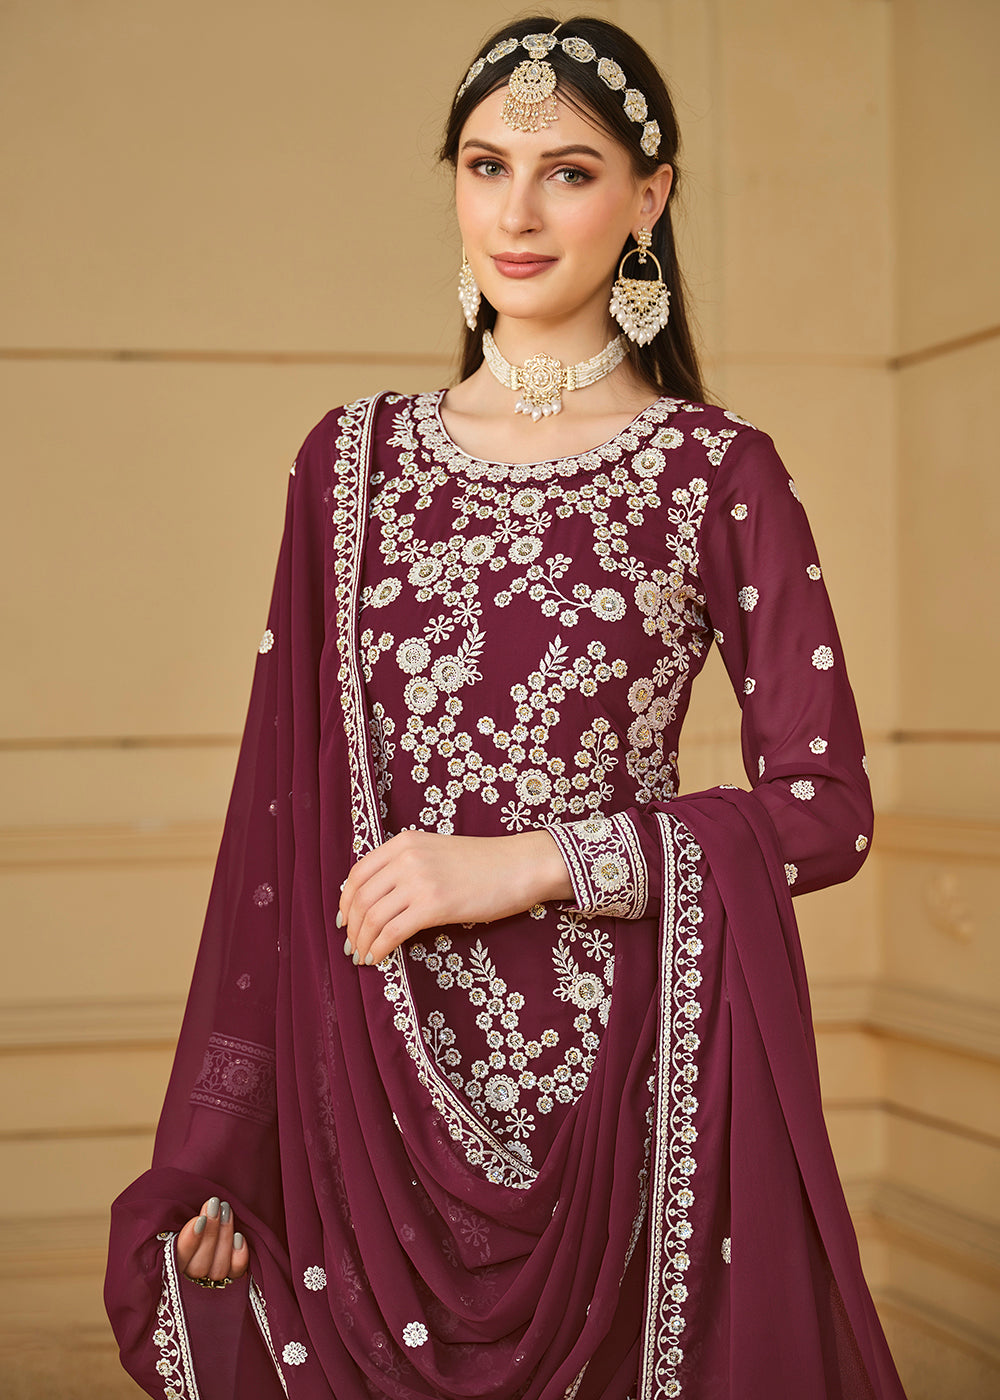 Shop Now Burgundy Wine Embroidered Georgette Gharara Style Suit Online at Empress Clothing in USA, UK, Canada, Italy & Worldwide. 